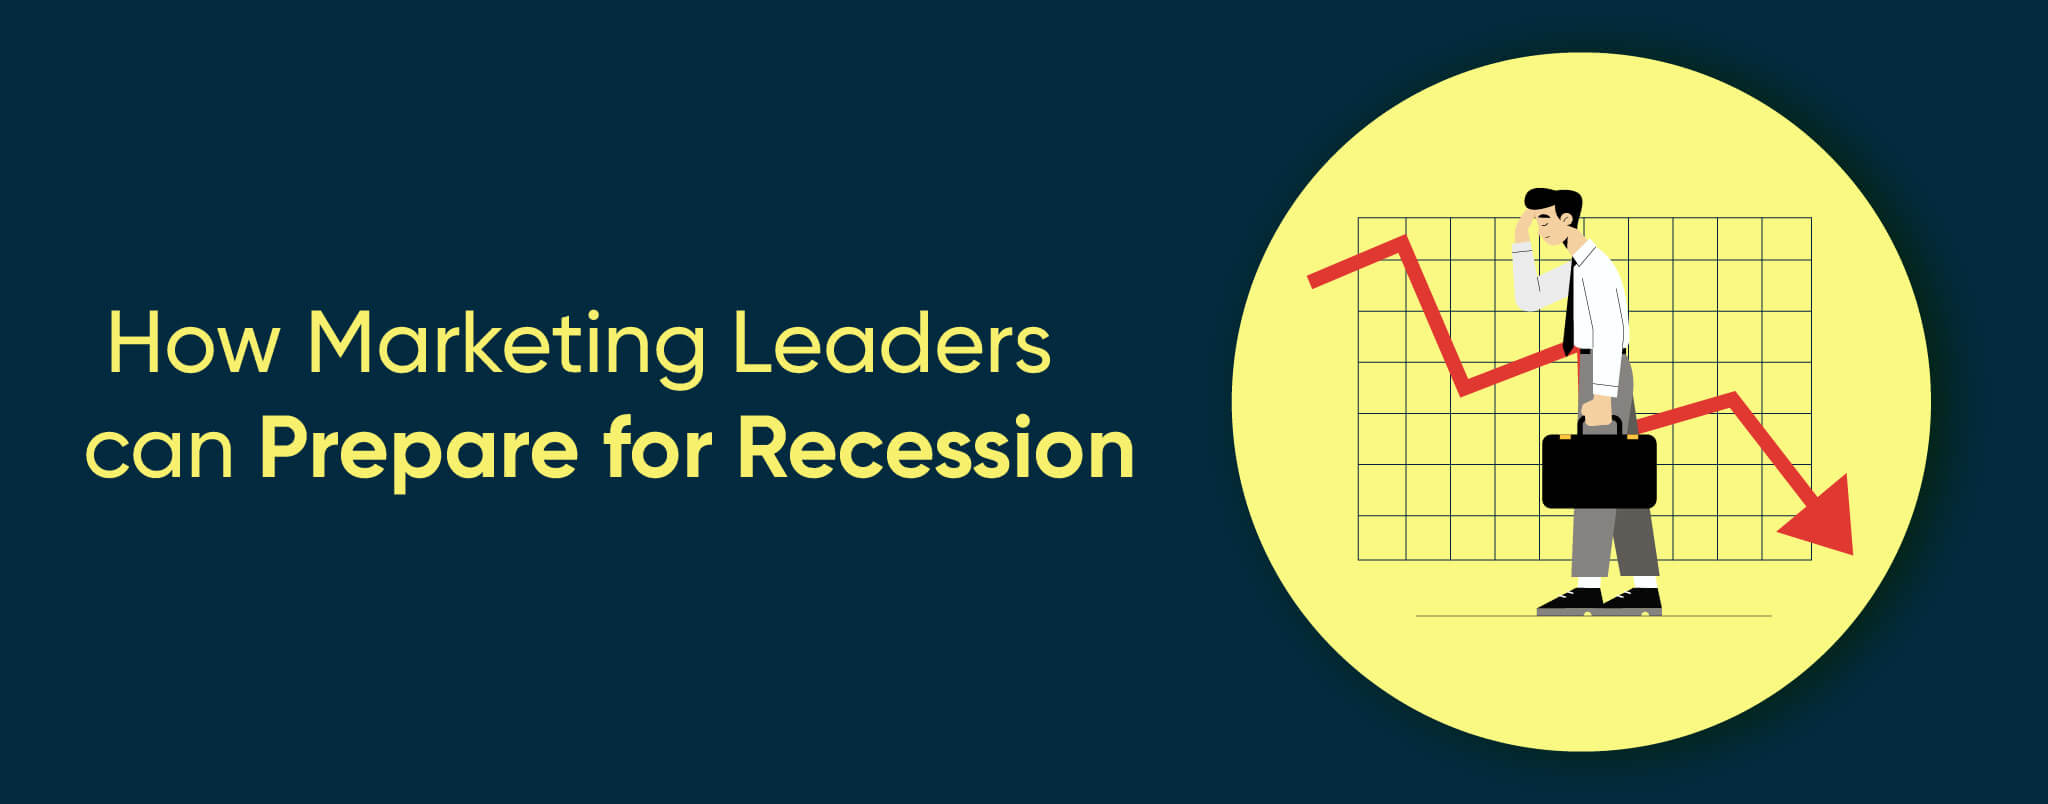 How-Marketing-Leaders-can-Prepare-for-Recession-Silverpush